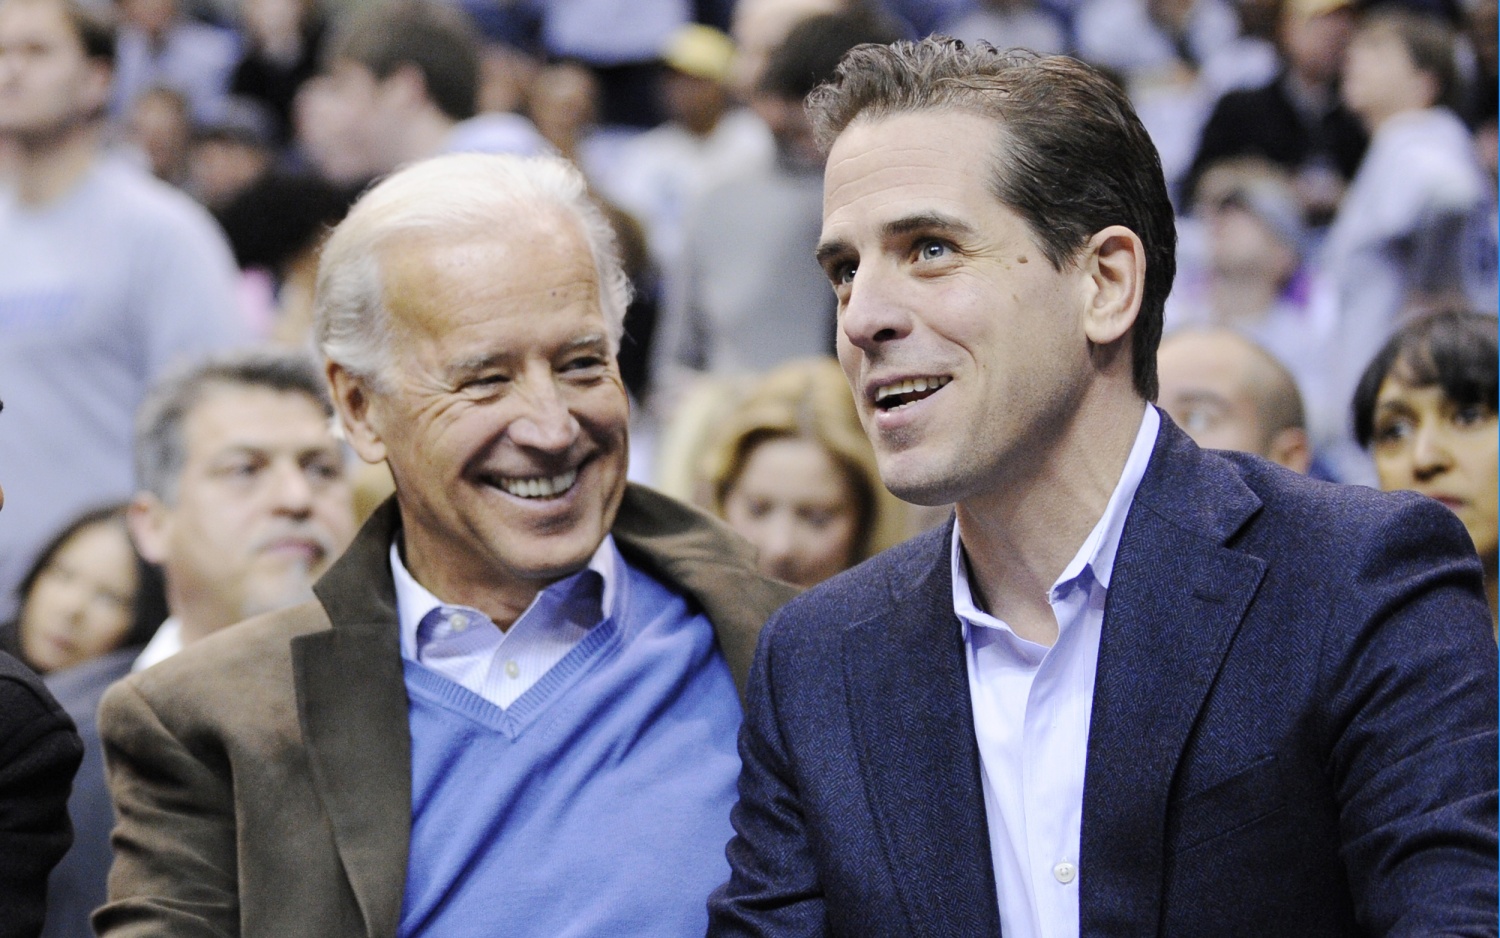 Feds examining alleged Hunter Biden emails linked a foreign intel operation